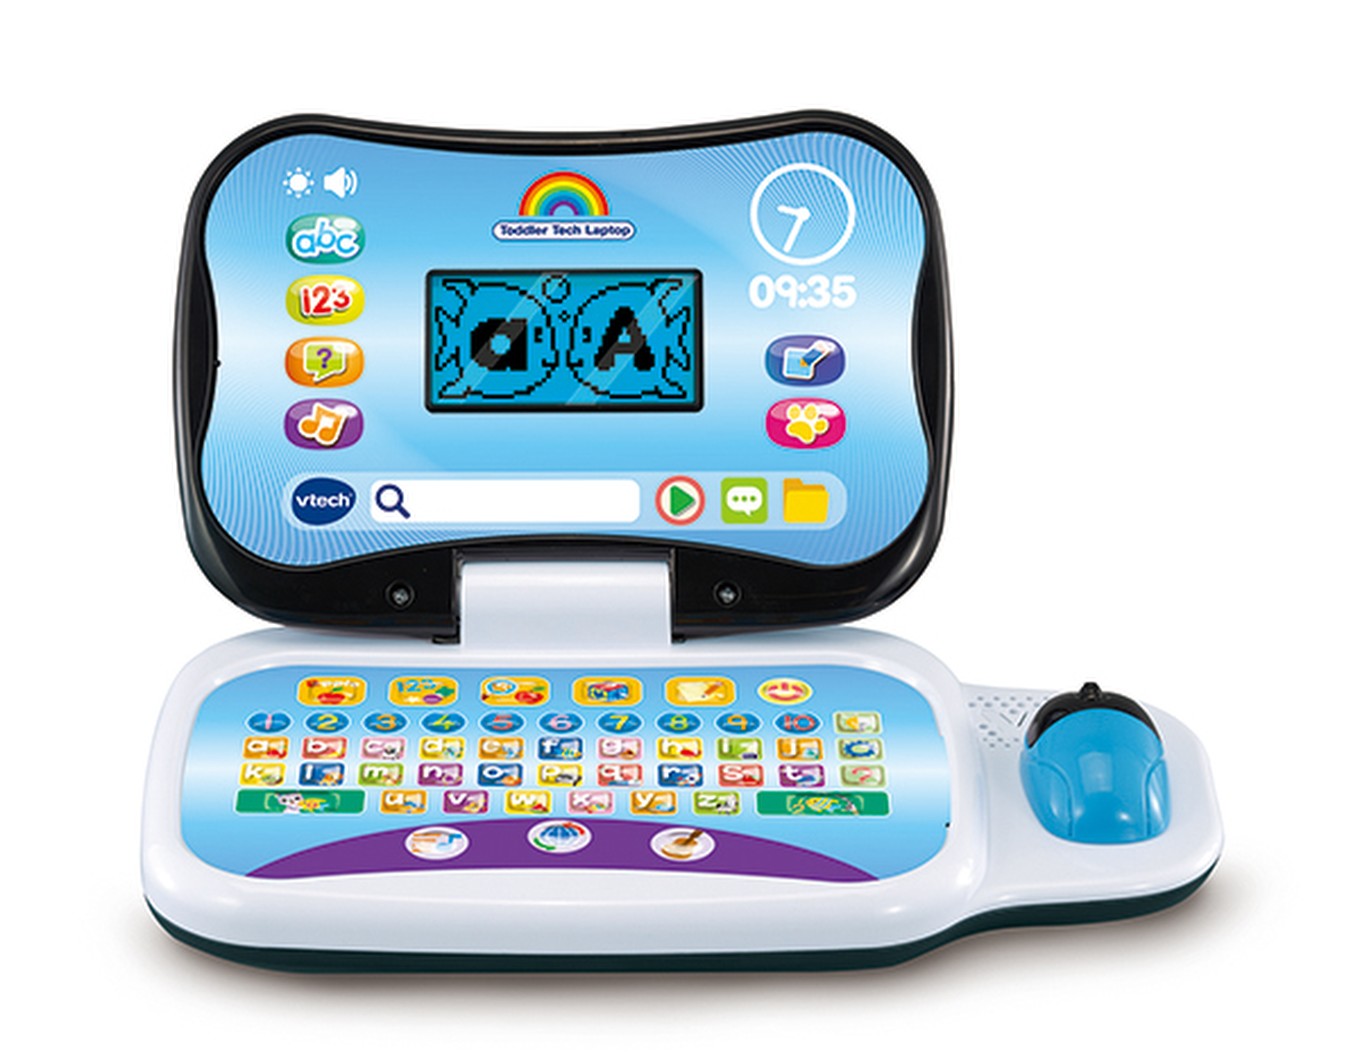 Vtech Laptop Ordi Genius Kid to the Toy (French Canada) 